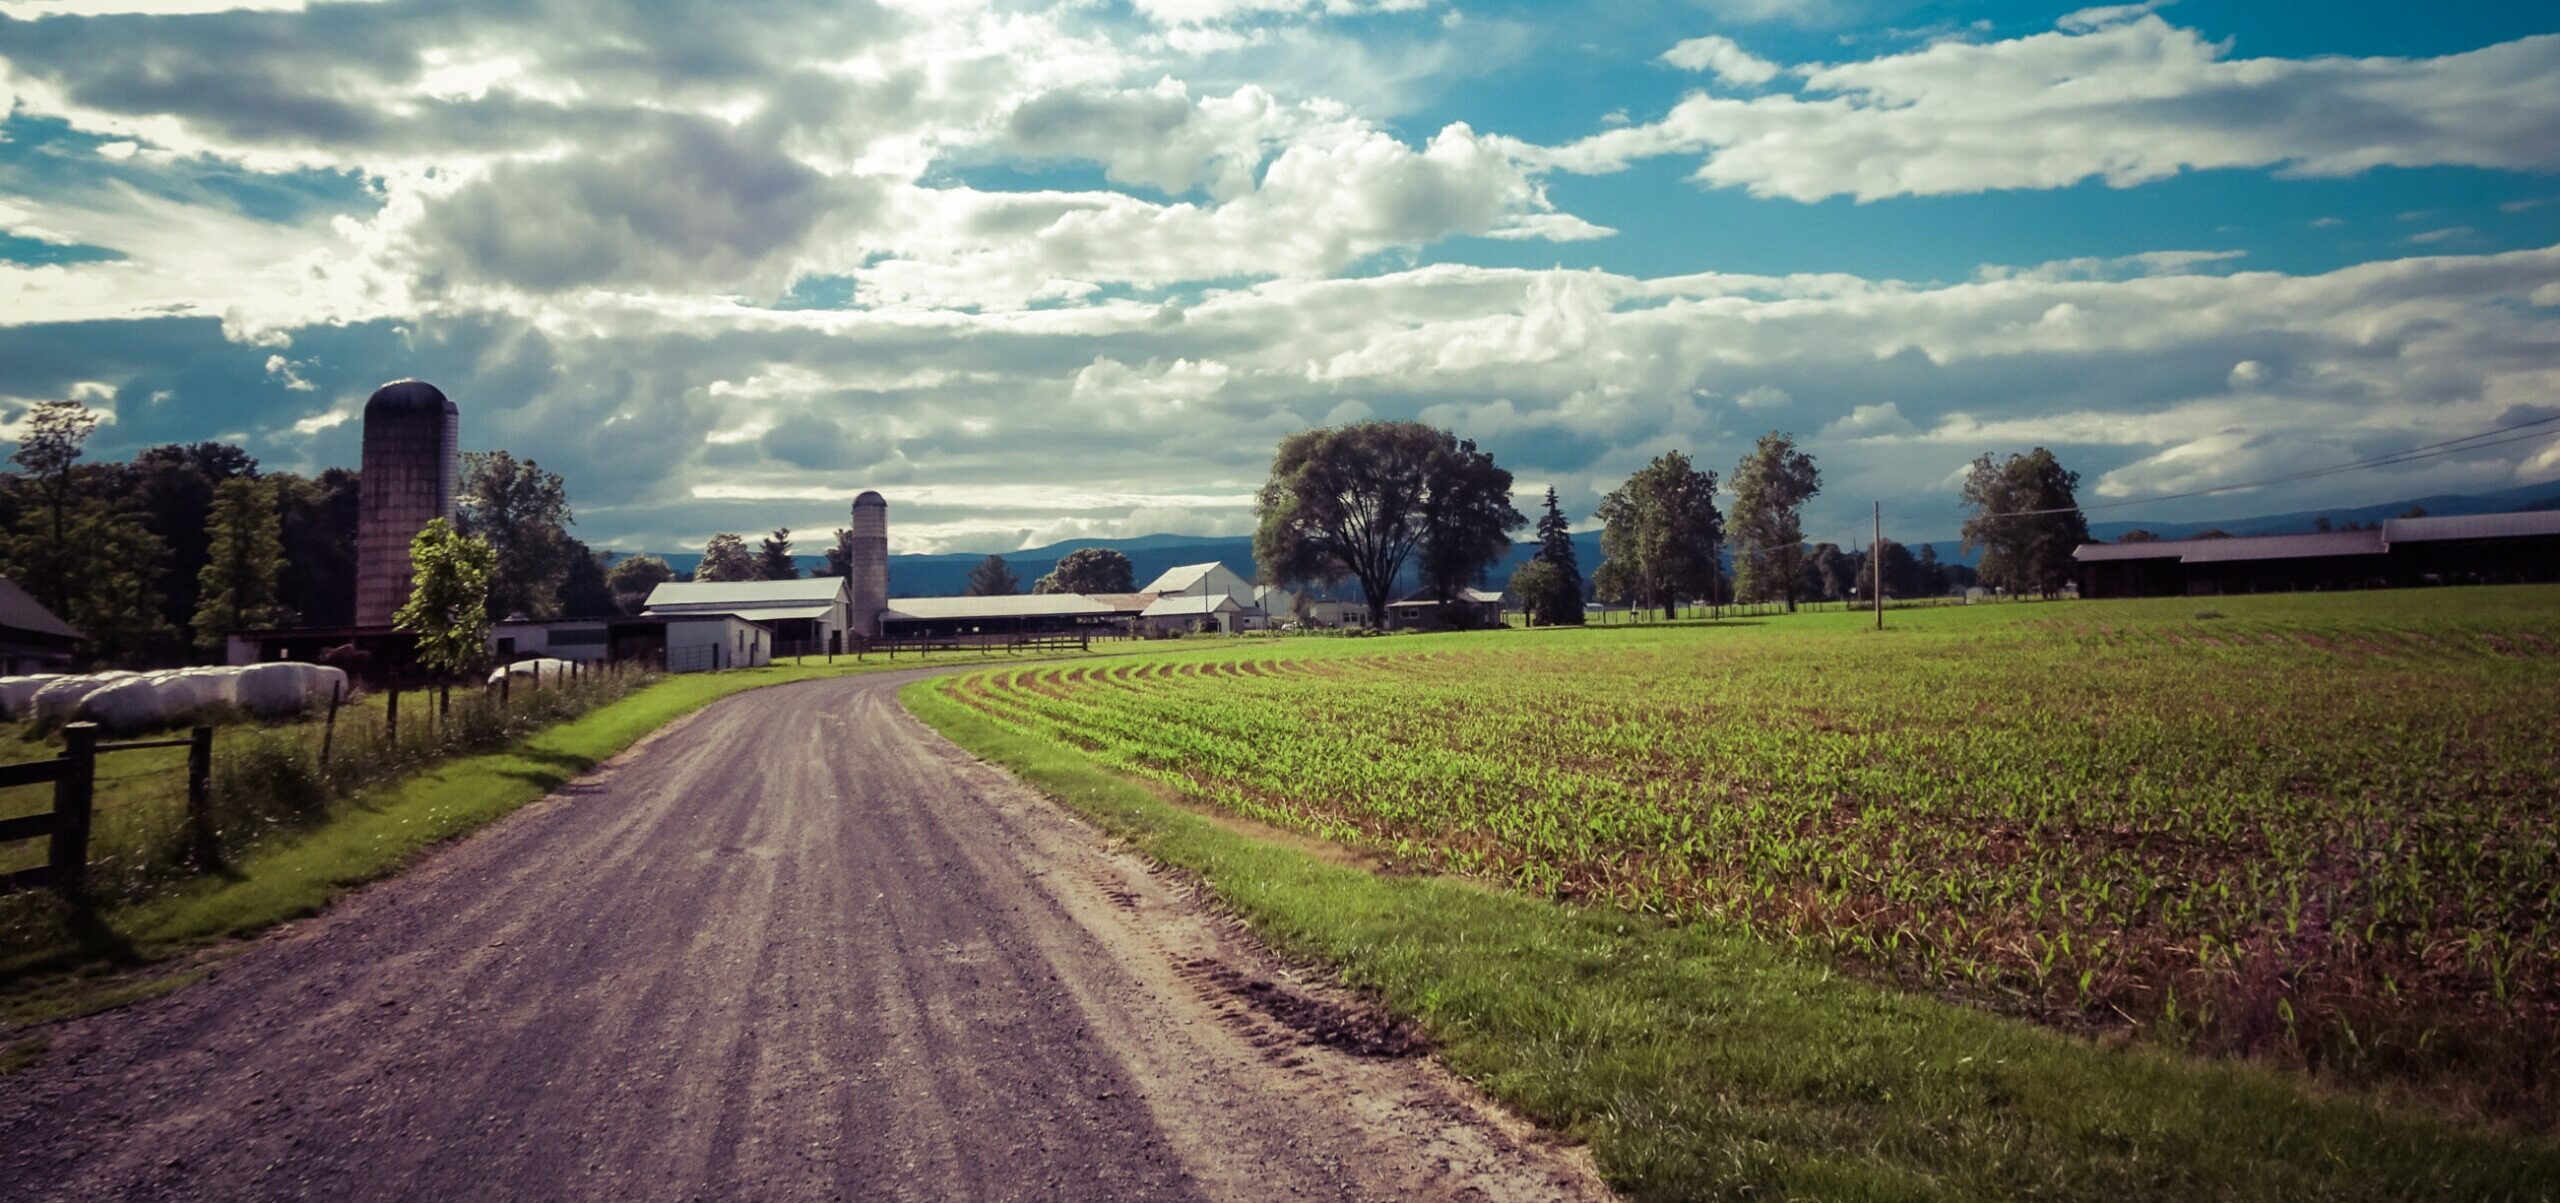 A gravel road cuts through a spring farm field of corn on one side and a barn and homestead on the other under a spectacular light blue sky dotted with clouds.